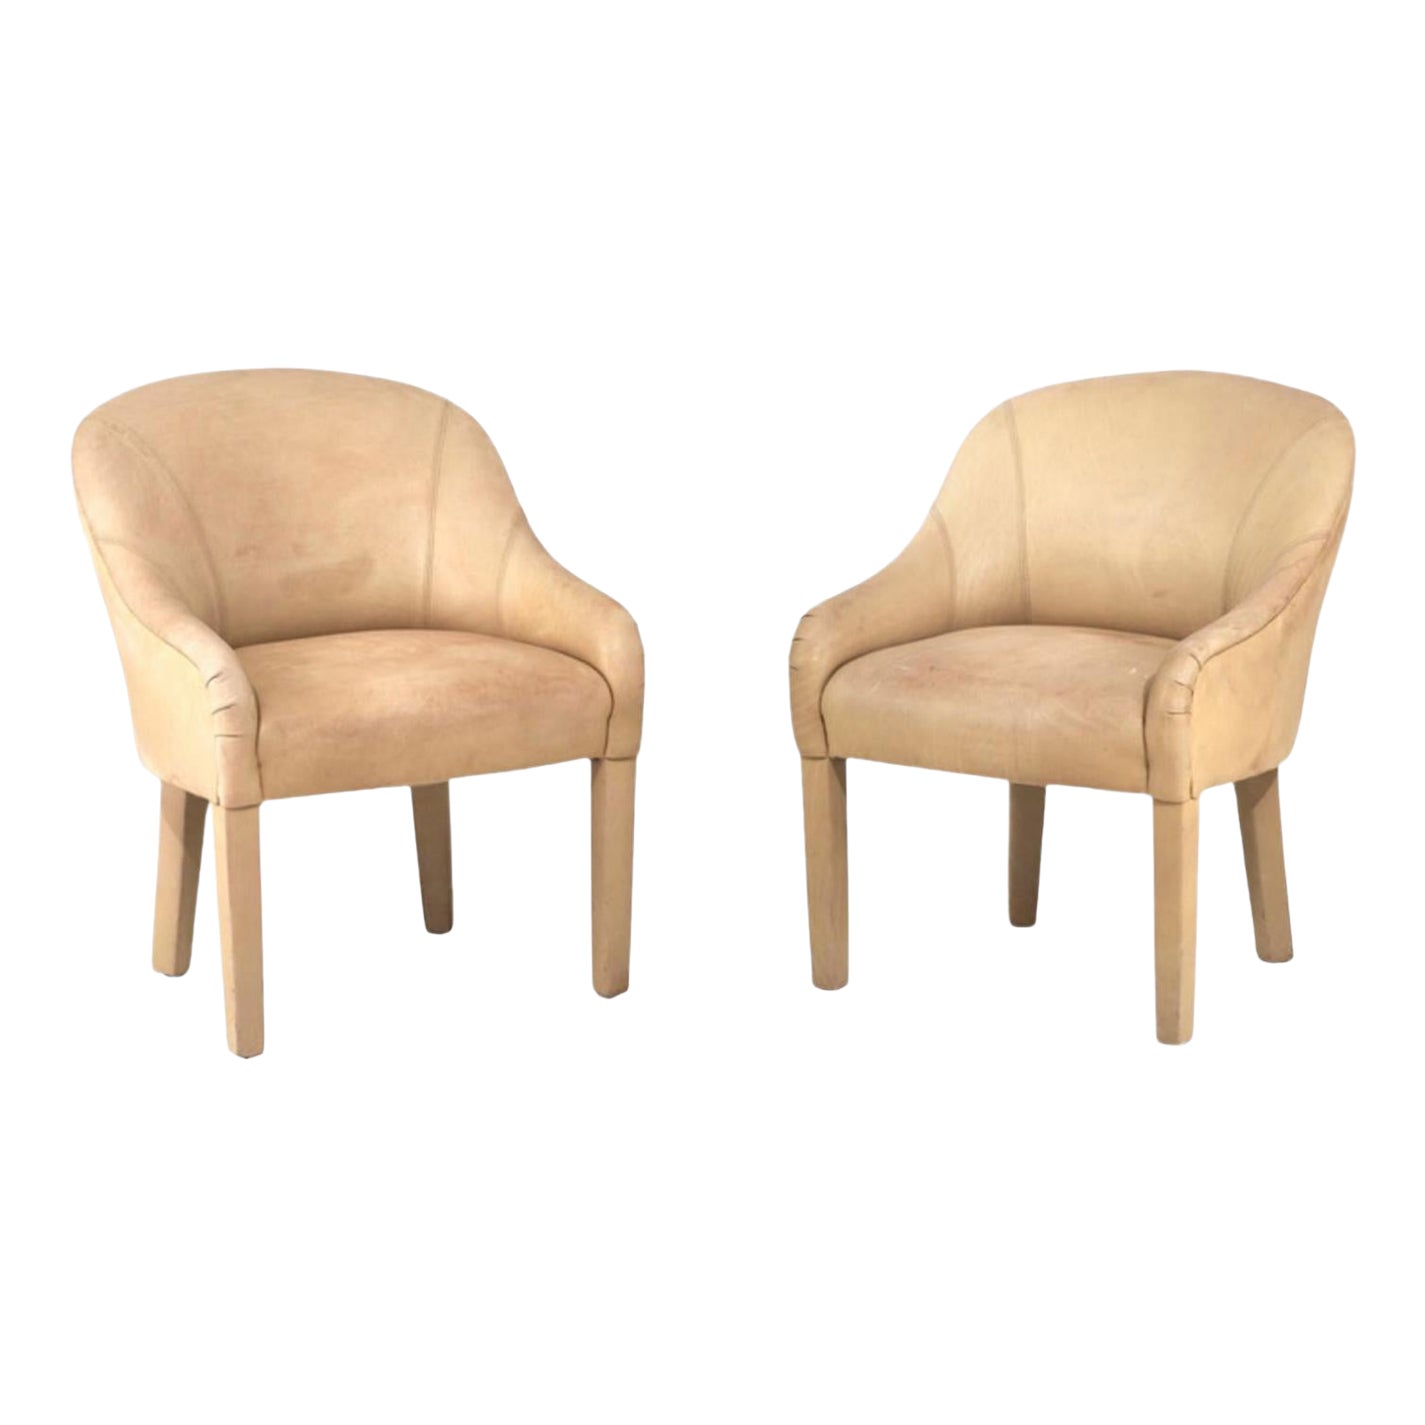 Sally Sirkin for Robert Scott Pair of Leather Arm Chairs, 1970 For Sale